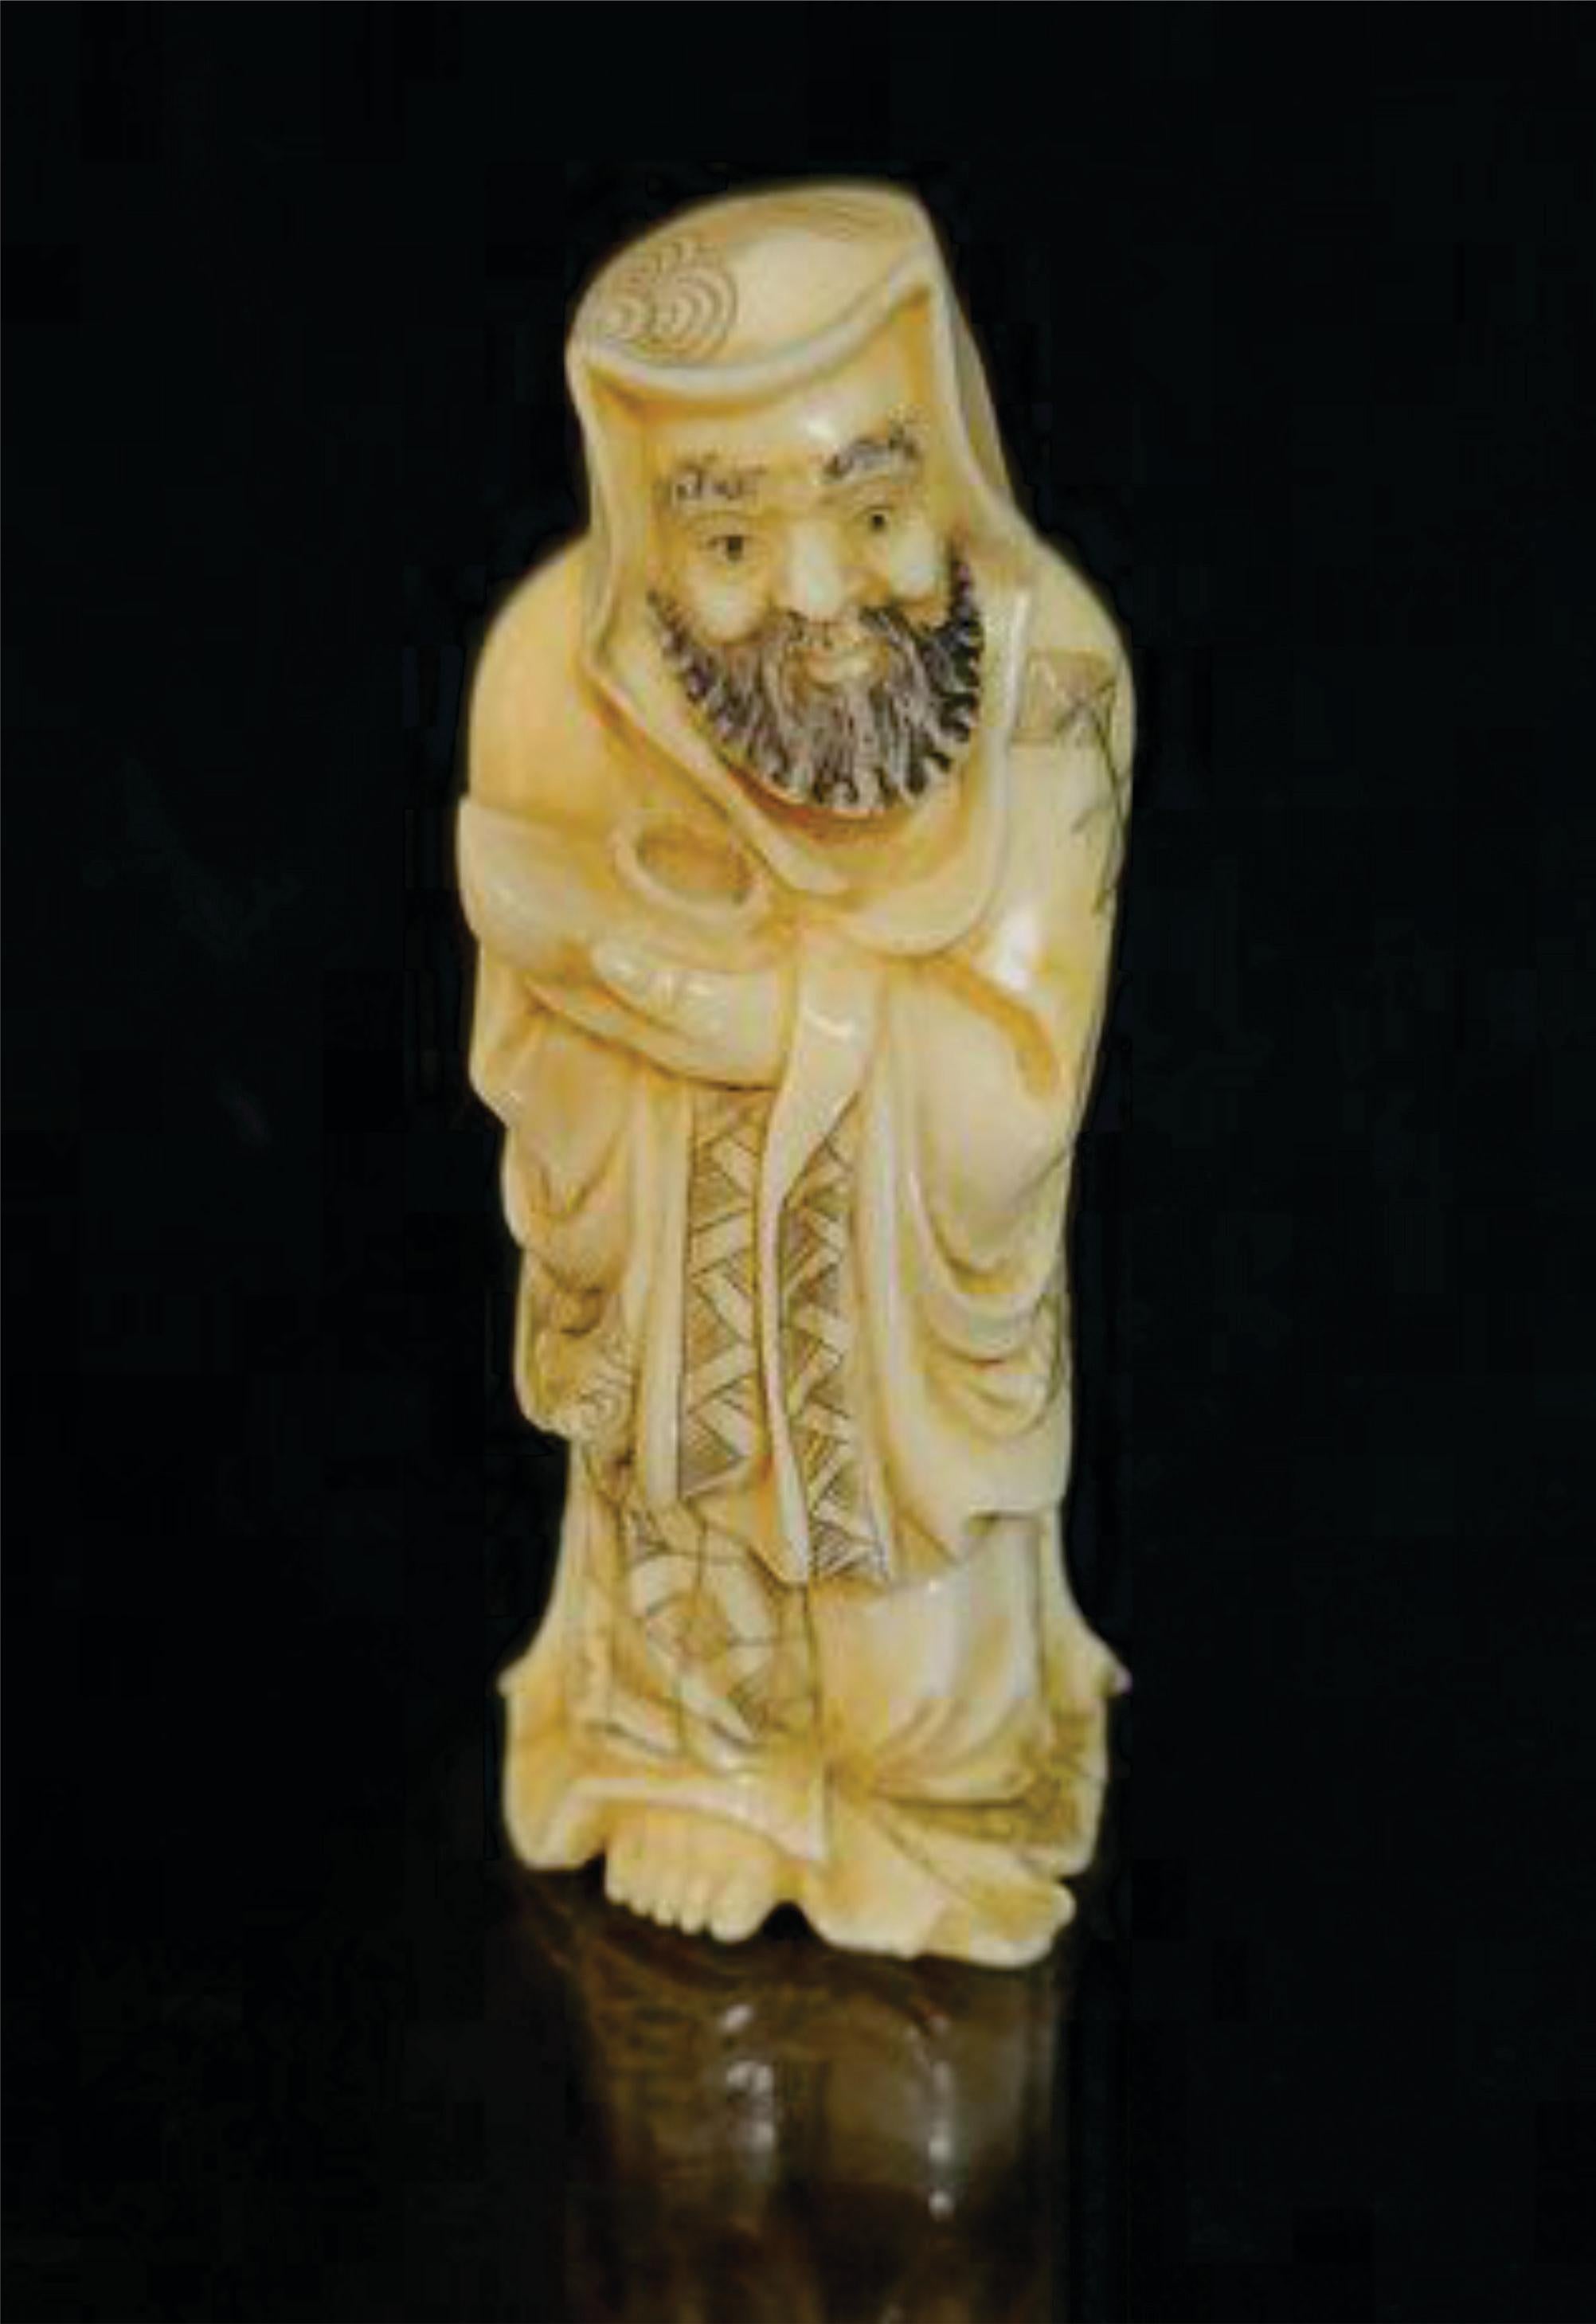 Netsuke Japanese Hand-Carved Mixed Material Figure, A Wise Man Holding a Treasure-Signed by Shozan from the Meiji period. Ric.NA006

A truly hand-carved ivory figure, A Wise Man Holding a Treasure, shows a museum quality in detailing signed by